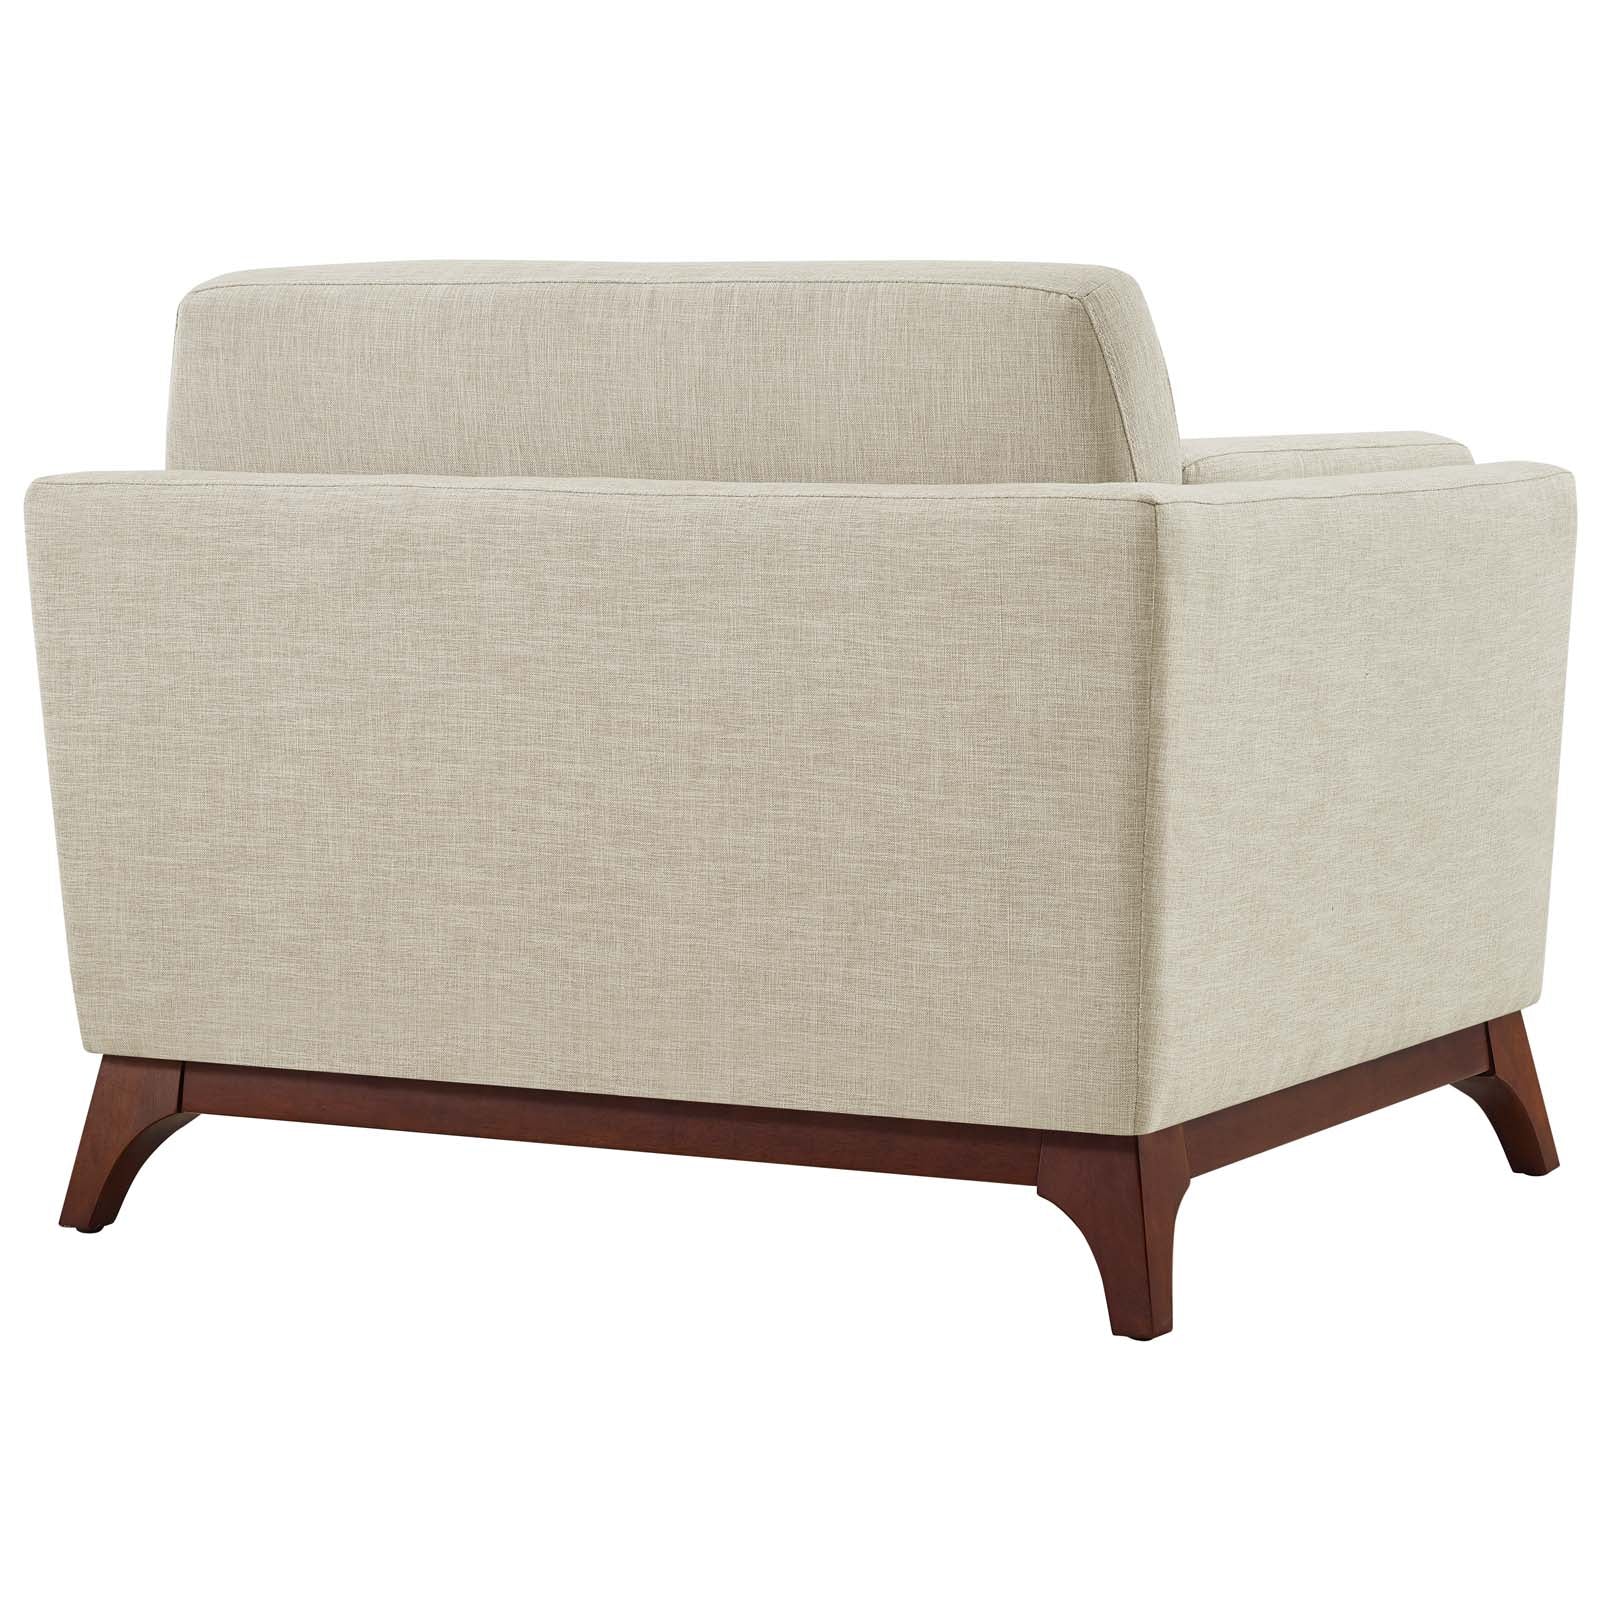 Modway Accent Chairs - Chance Upholstered Fabric Armchair Beige